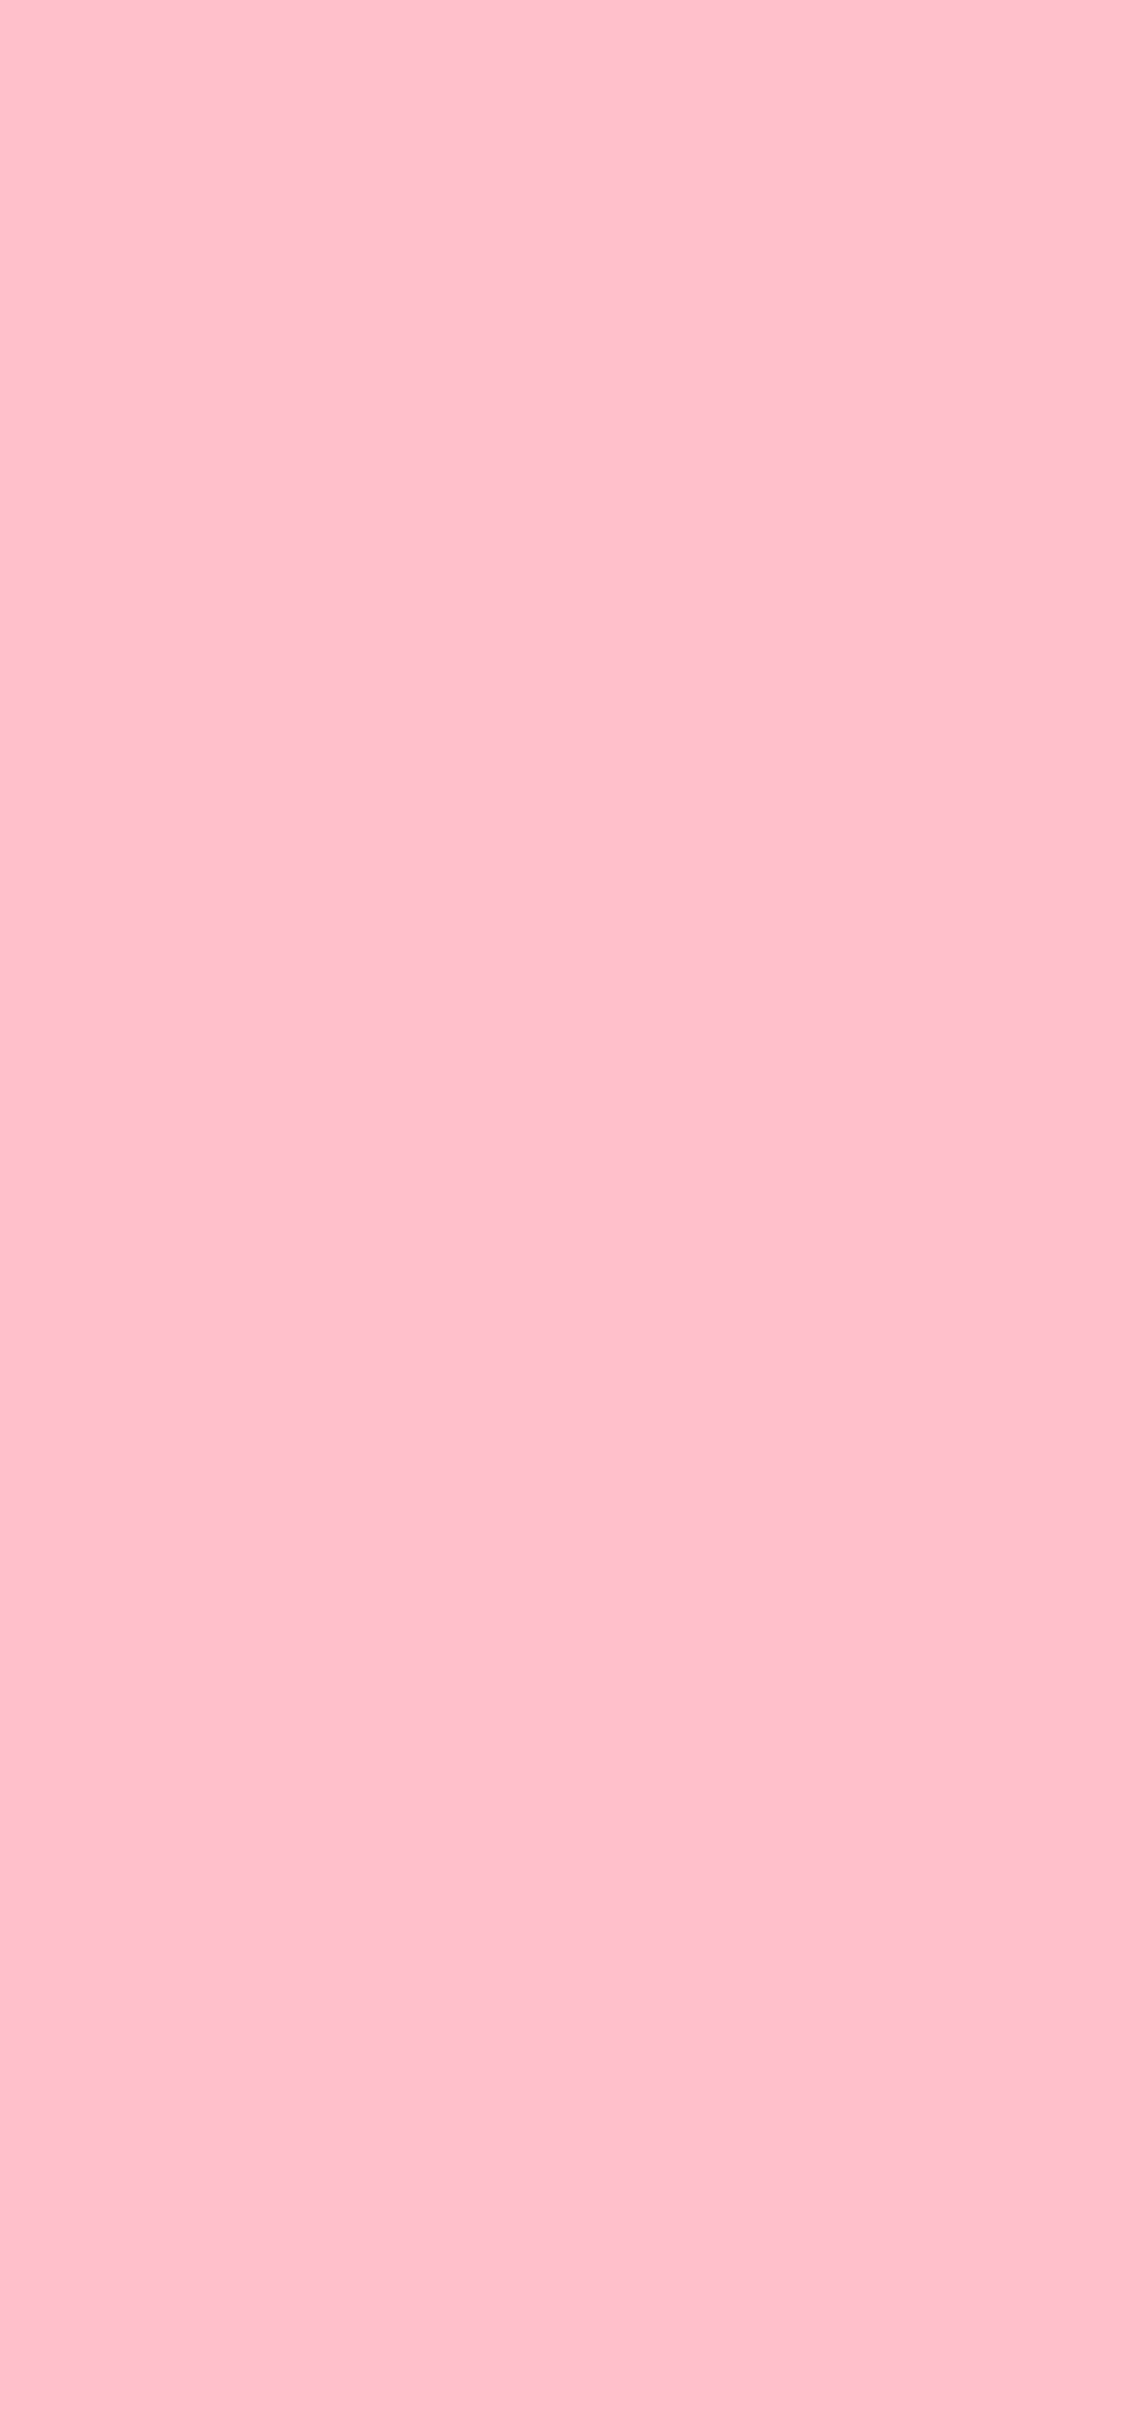 1125x2436 Pink Solid Color Background